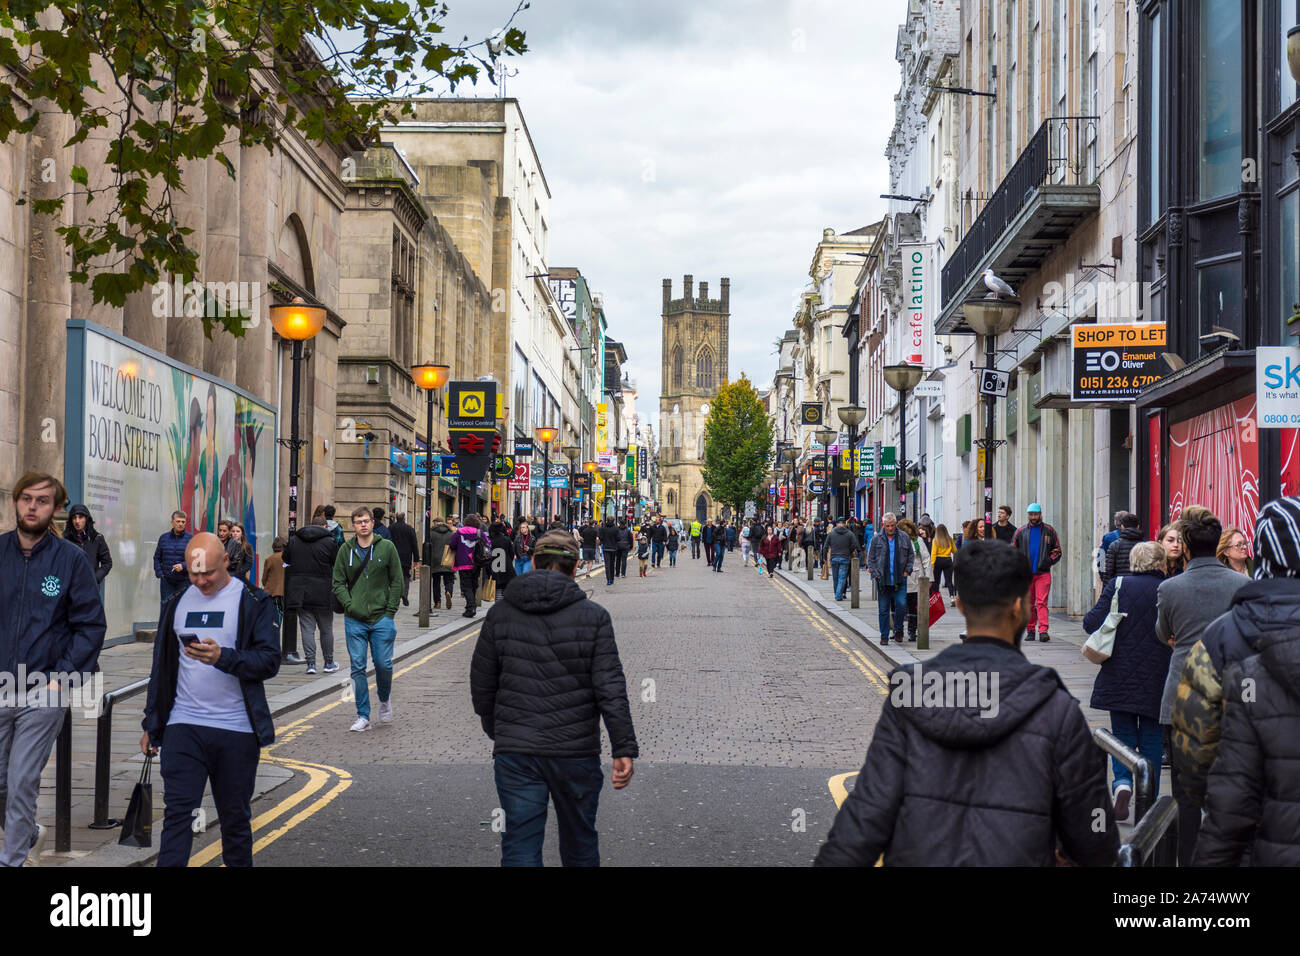 Bold Street, Liverpool, UK. Shoppers in the busy city centre retail district. Stock Photo